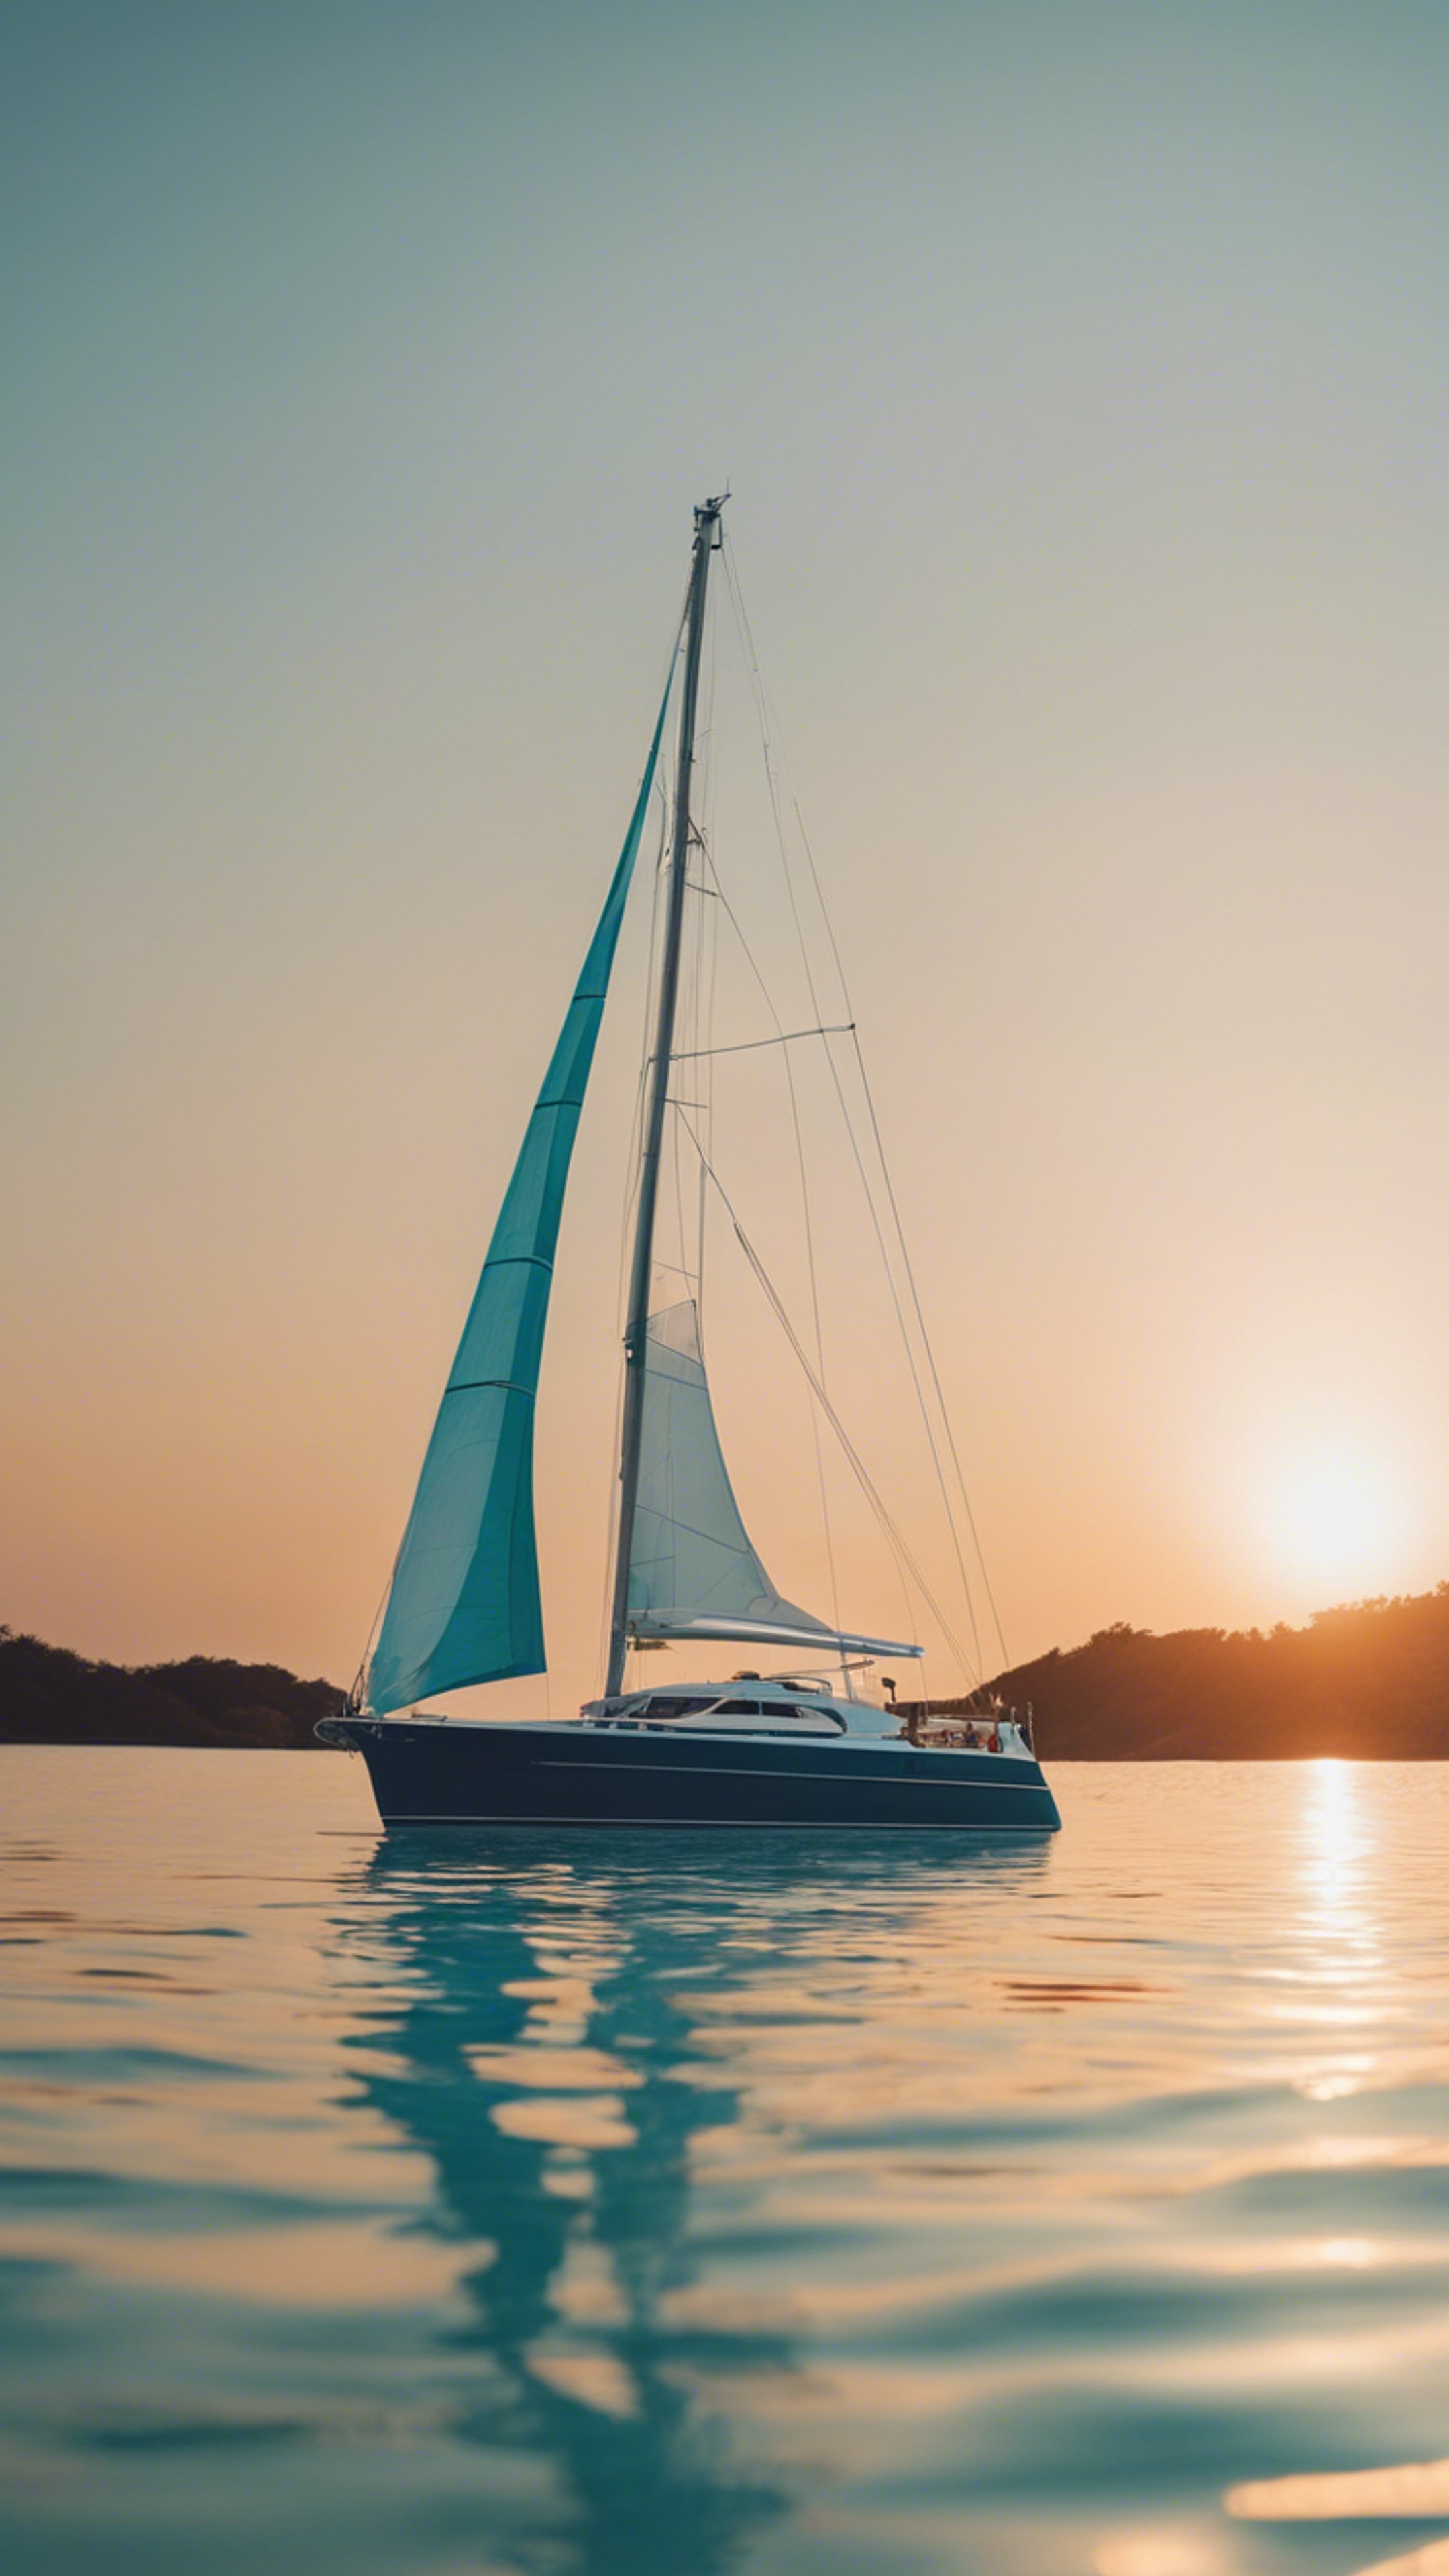 A preppy blue yacht sailing calmly on clear aquamarine waters at sunset. Обои[1bfcce9f38c64176b950]